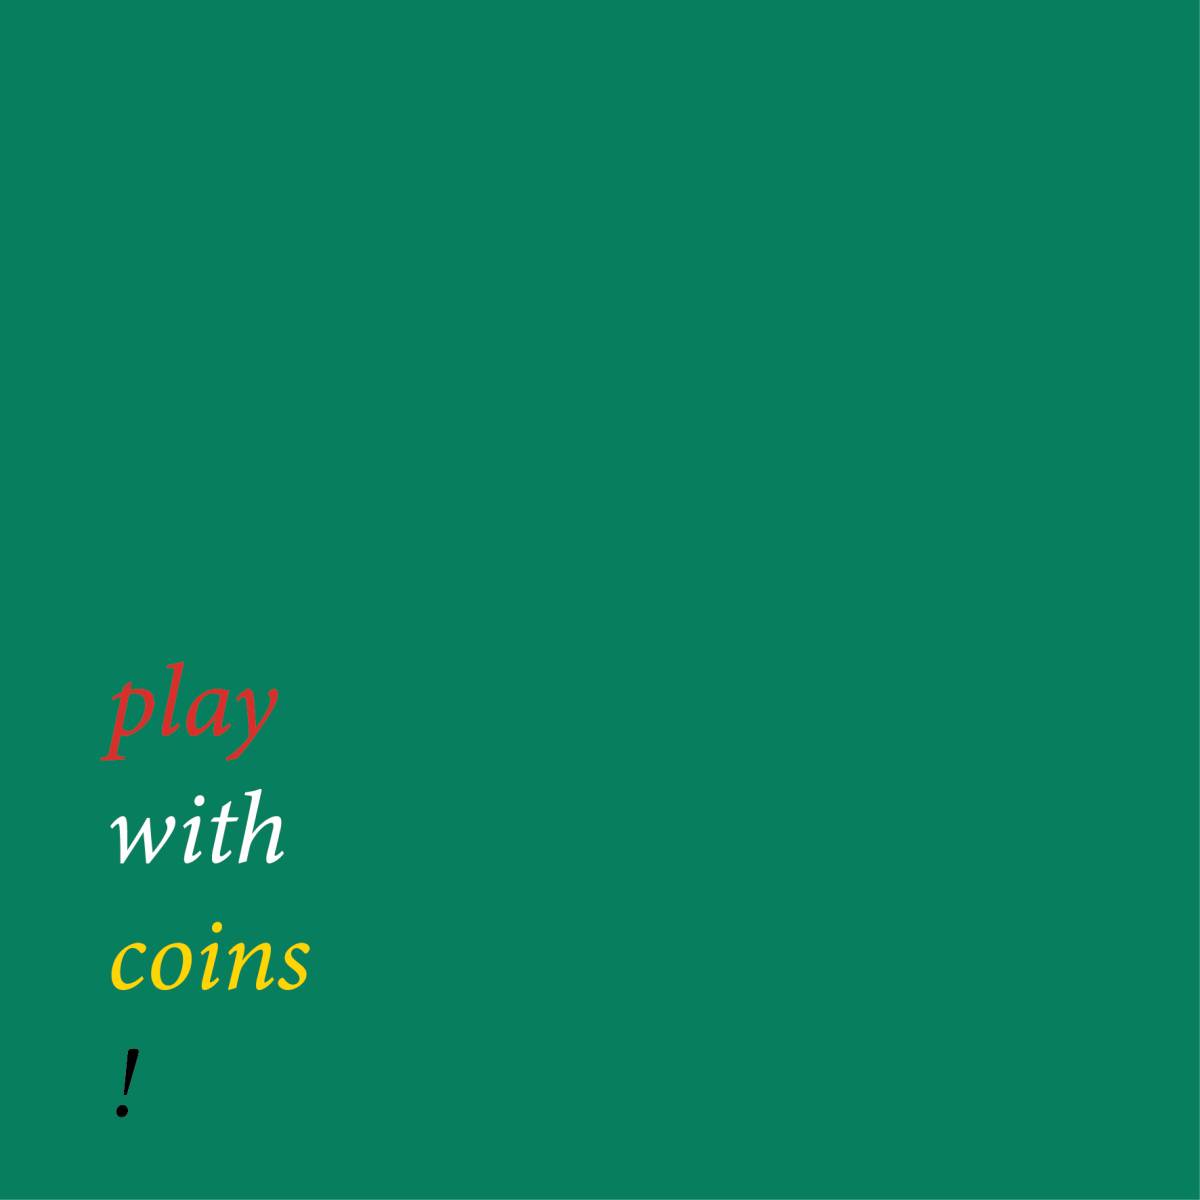 group PIF Financial play with coins on bran colour green